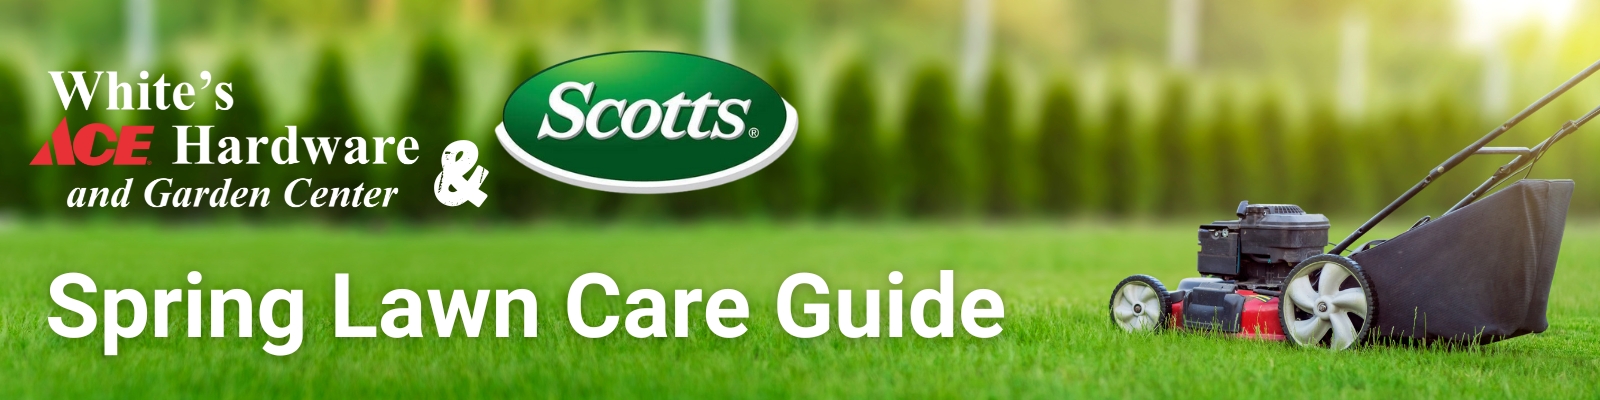 Spring Lawn Care Guide